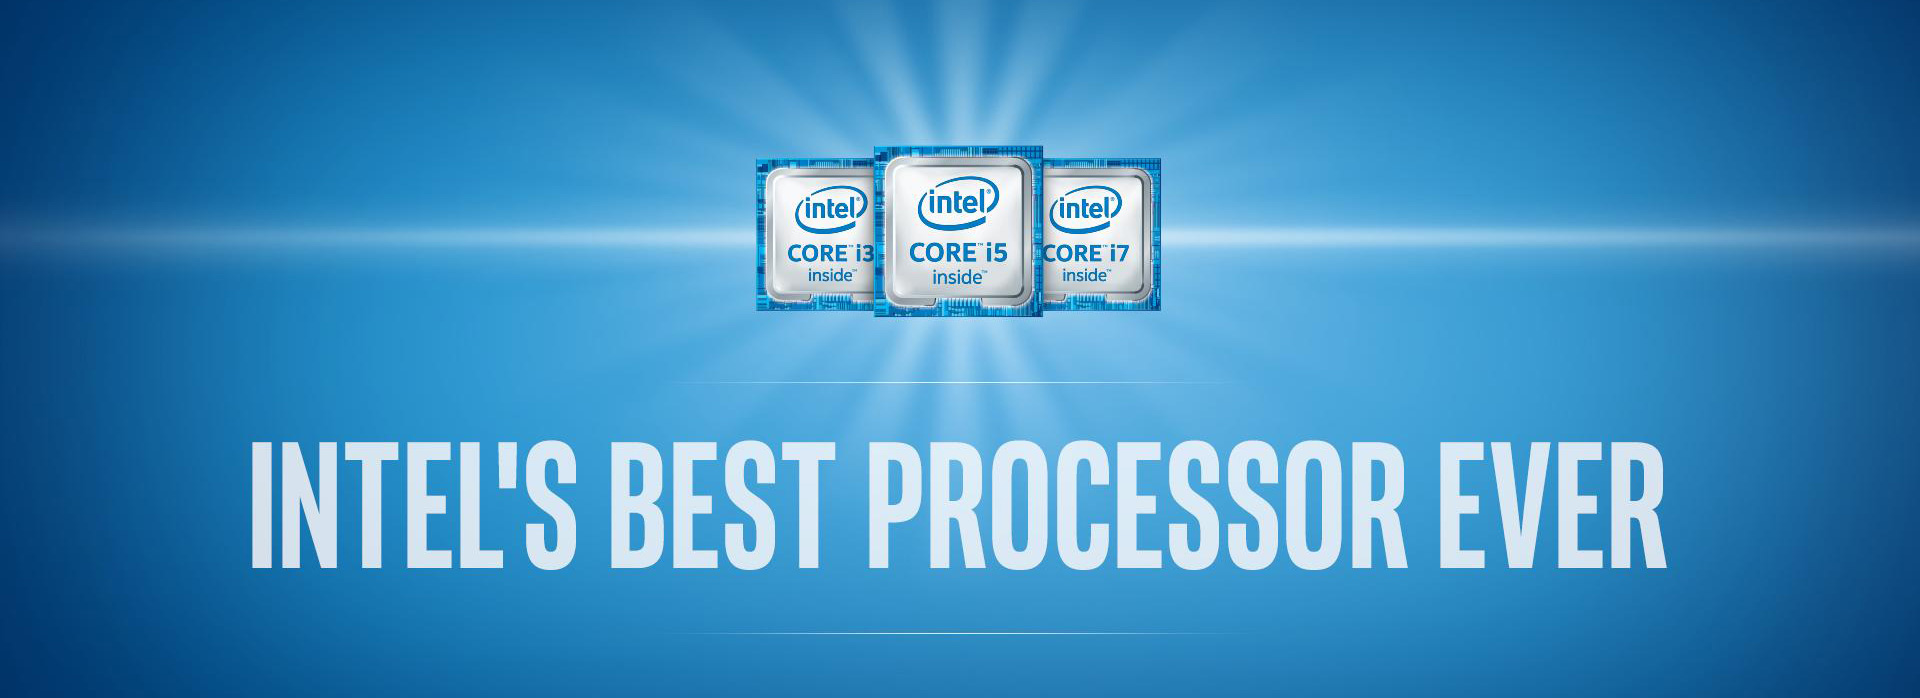 Intel Core i3 i5 and i7, their best ever processor